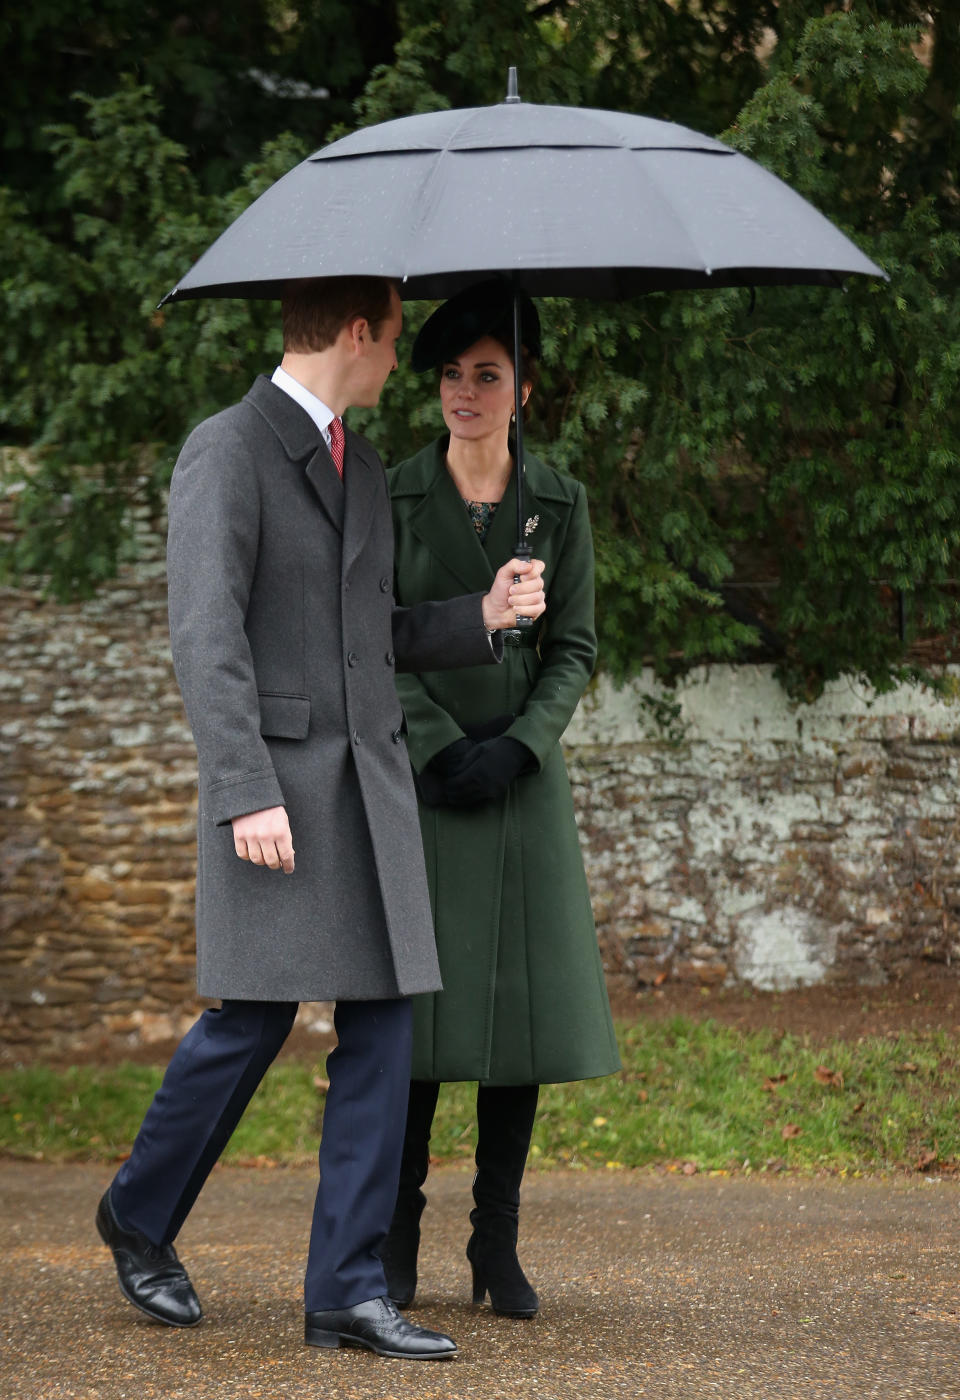 Prince William and Kate Middleton held an umbrella over themselves to greet fans in 2015. Photo: Getty Images